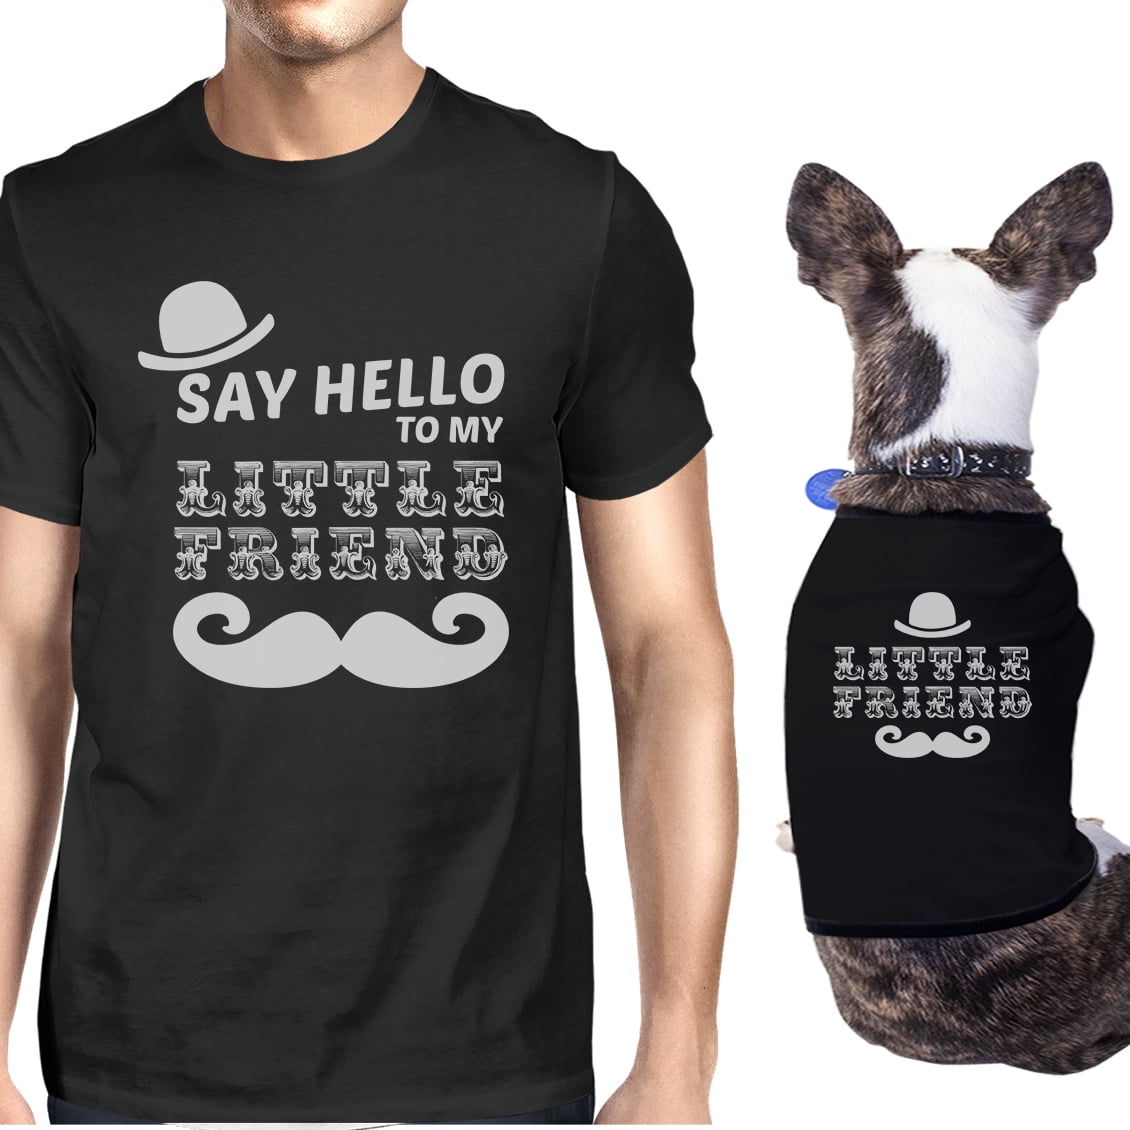 Details about   Copy And Paste Small Dog and Owner Matching Shirts Small Dog ONLY 